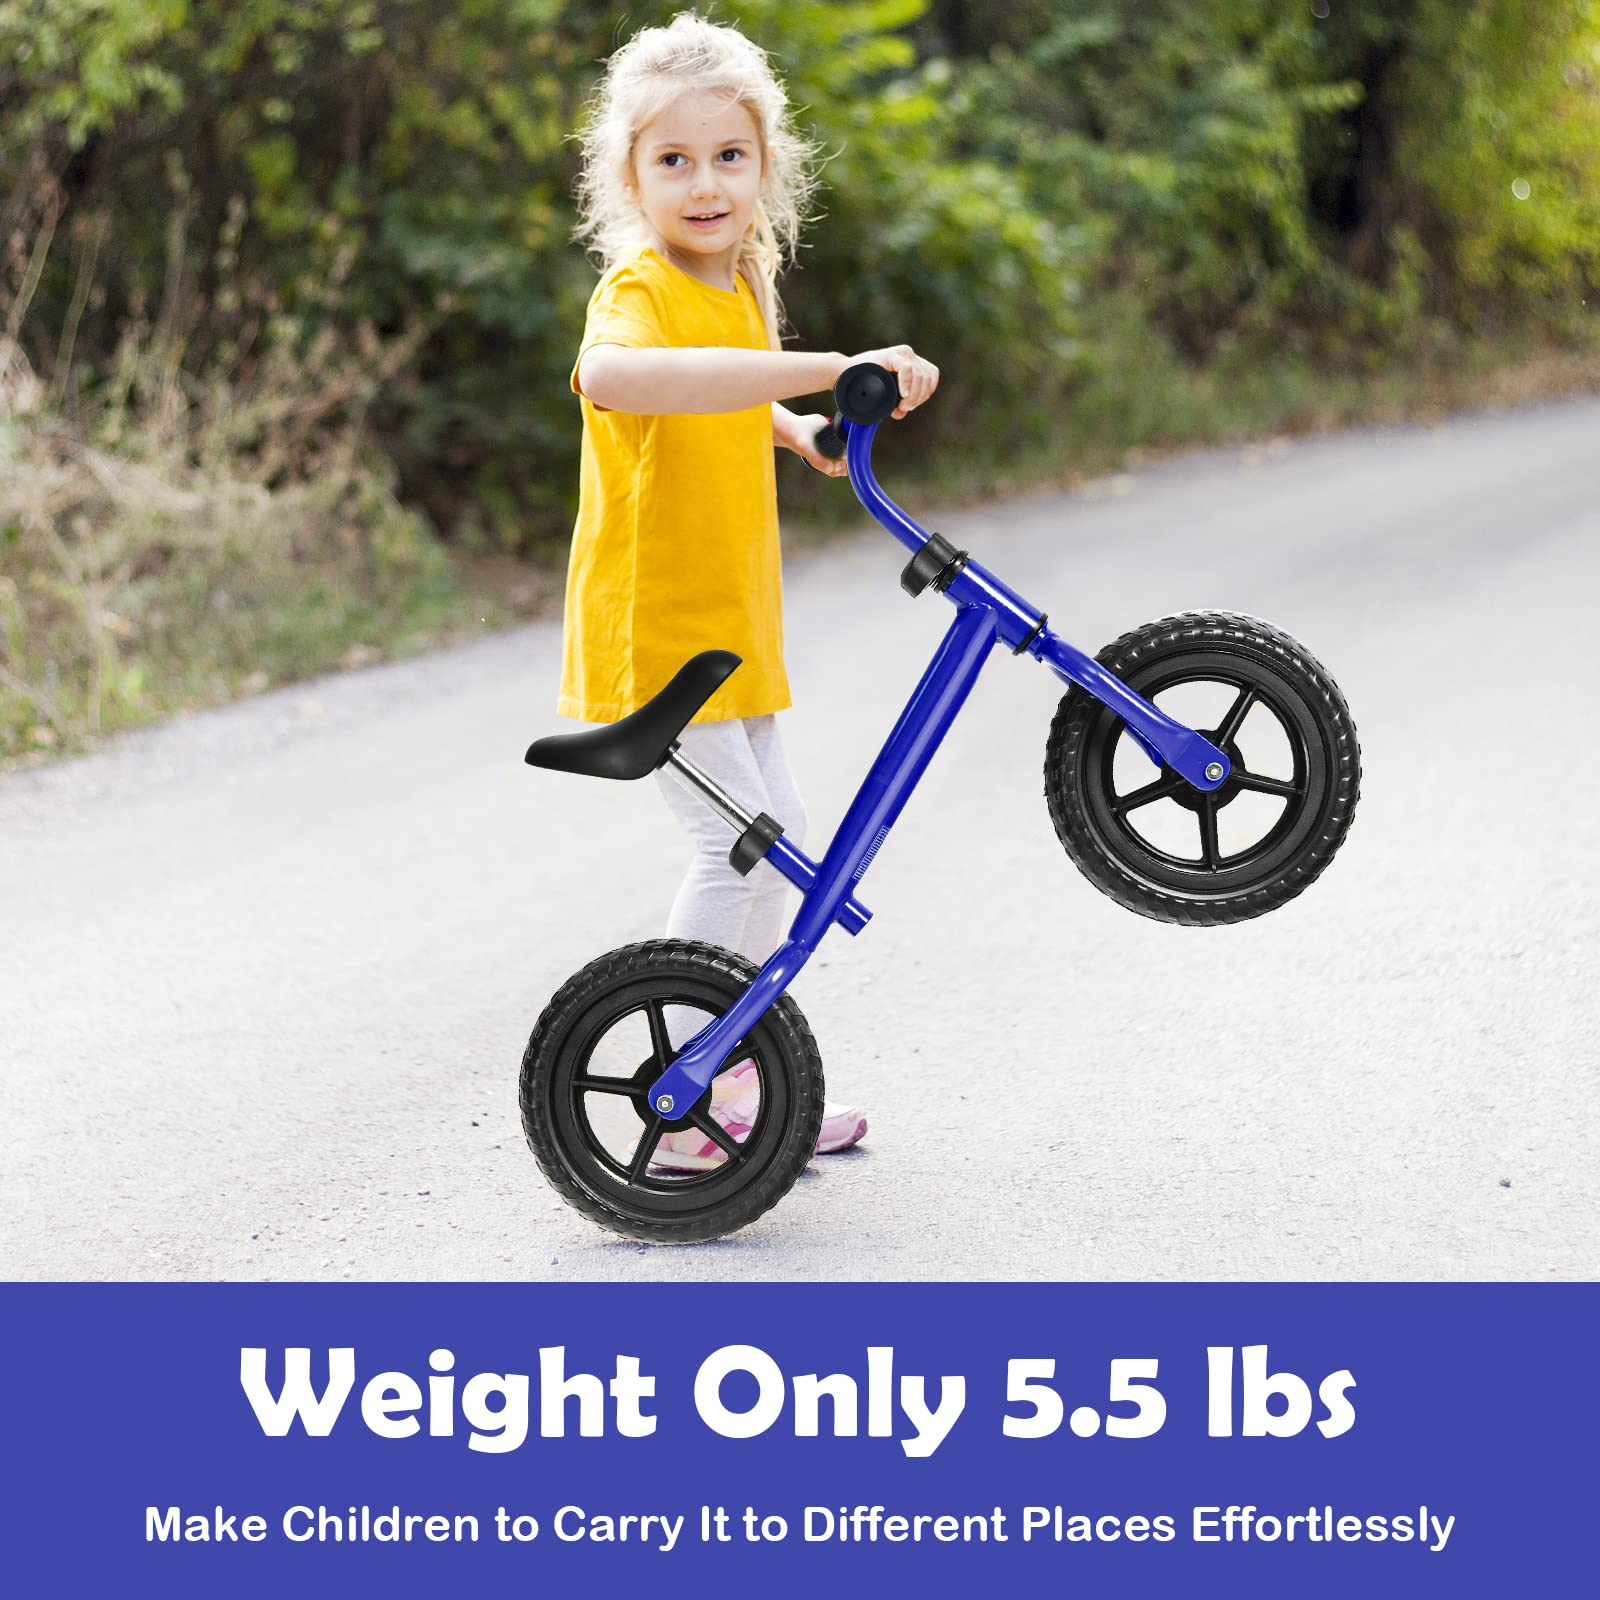 BABY JOY Kids Balance Bike, No Pedal Training Bicycle with Adjustable Handlebar & Seat and Puncture-Proof EVA Tires